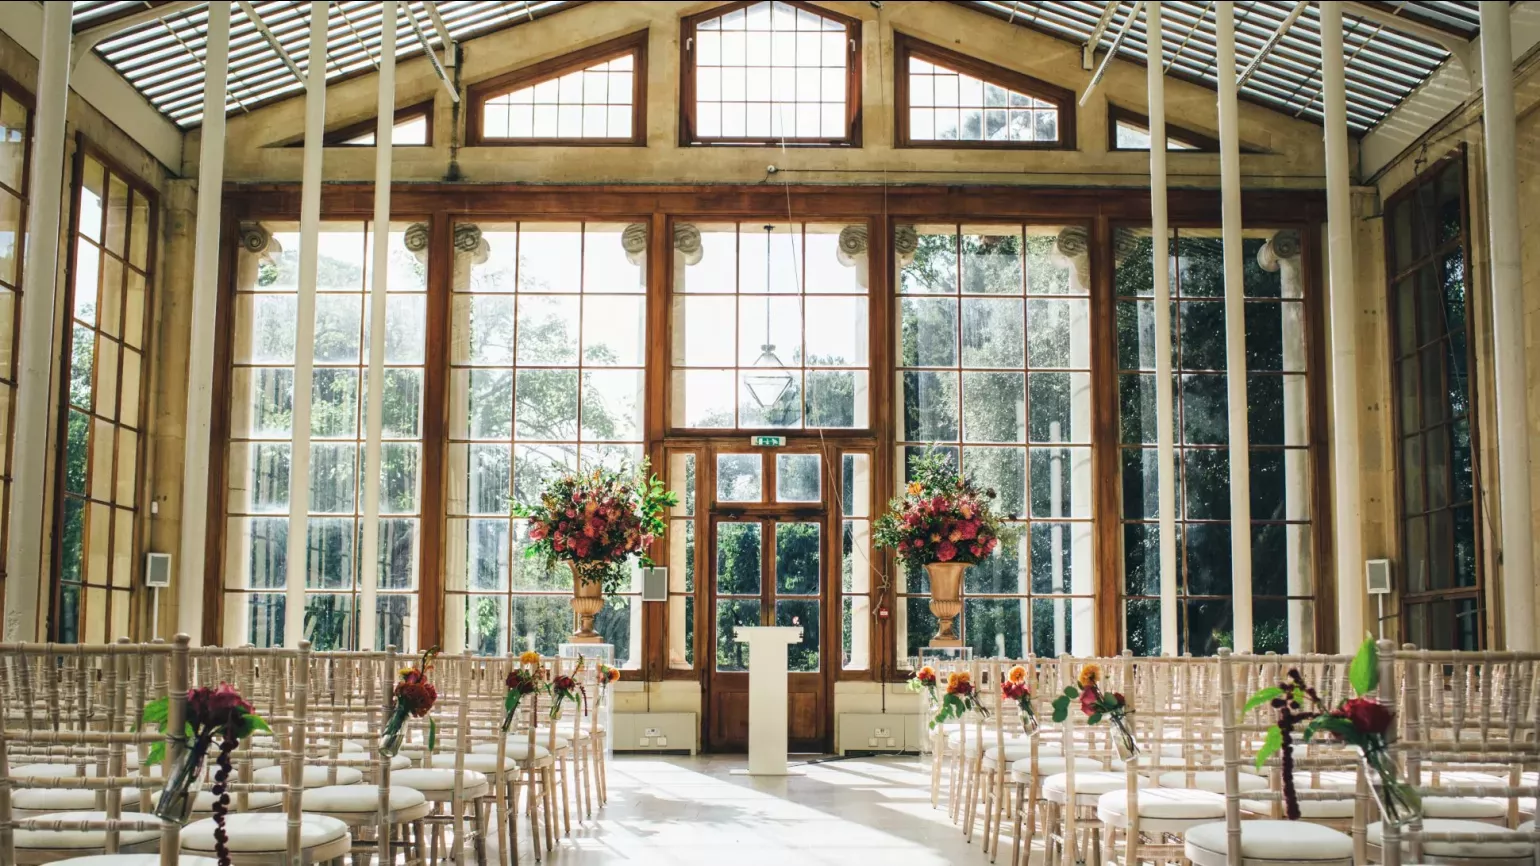 The Nash Conservatory decorated for a wedding